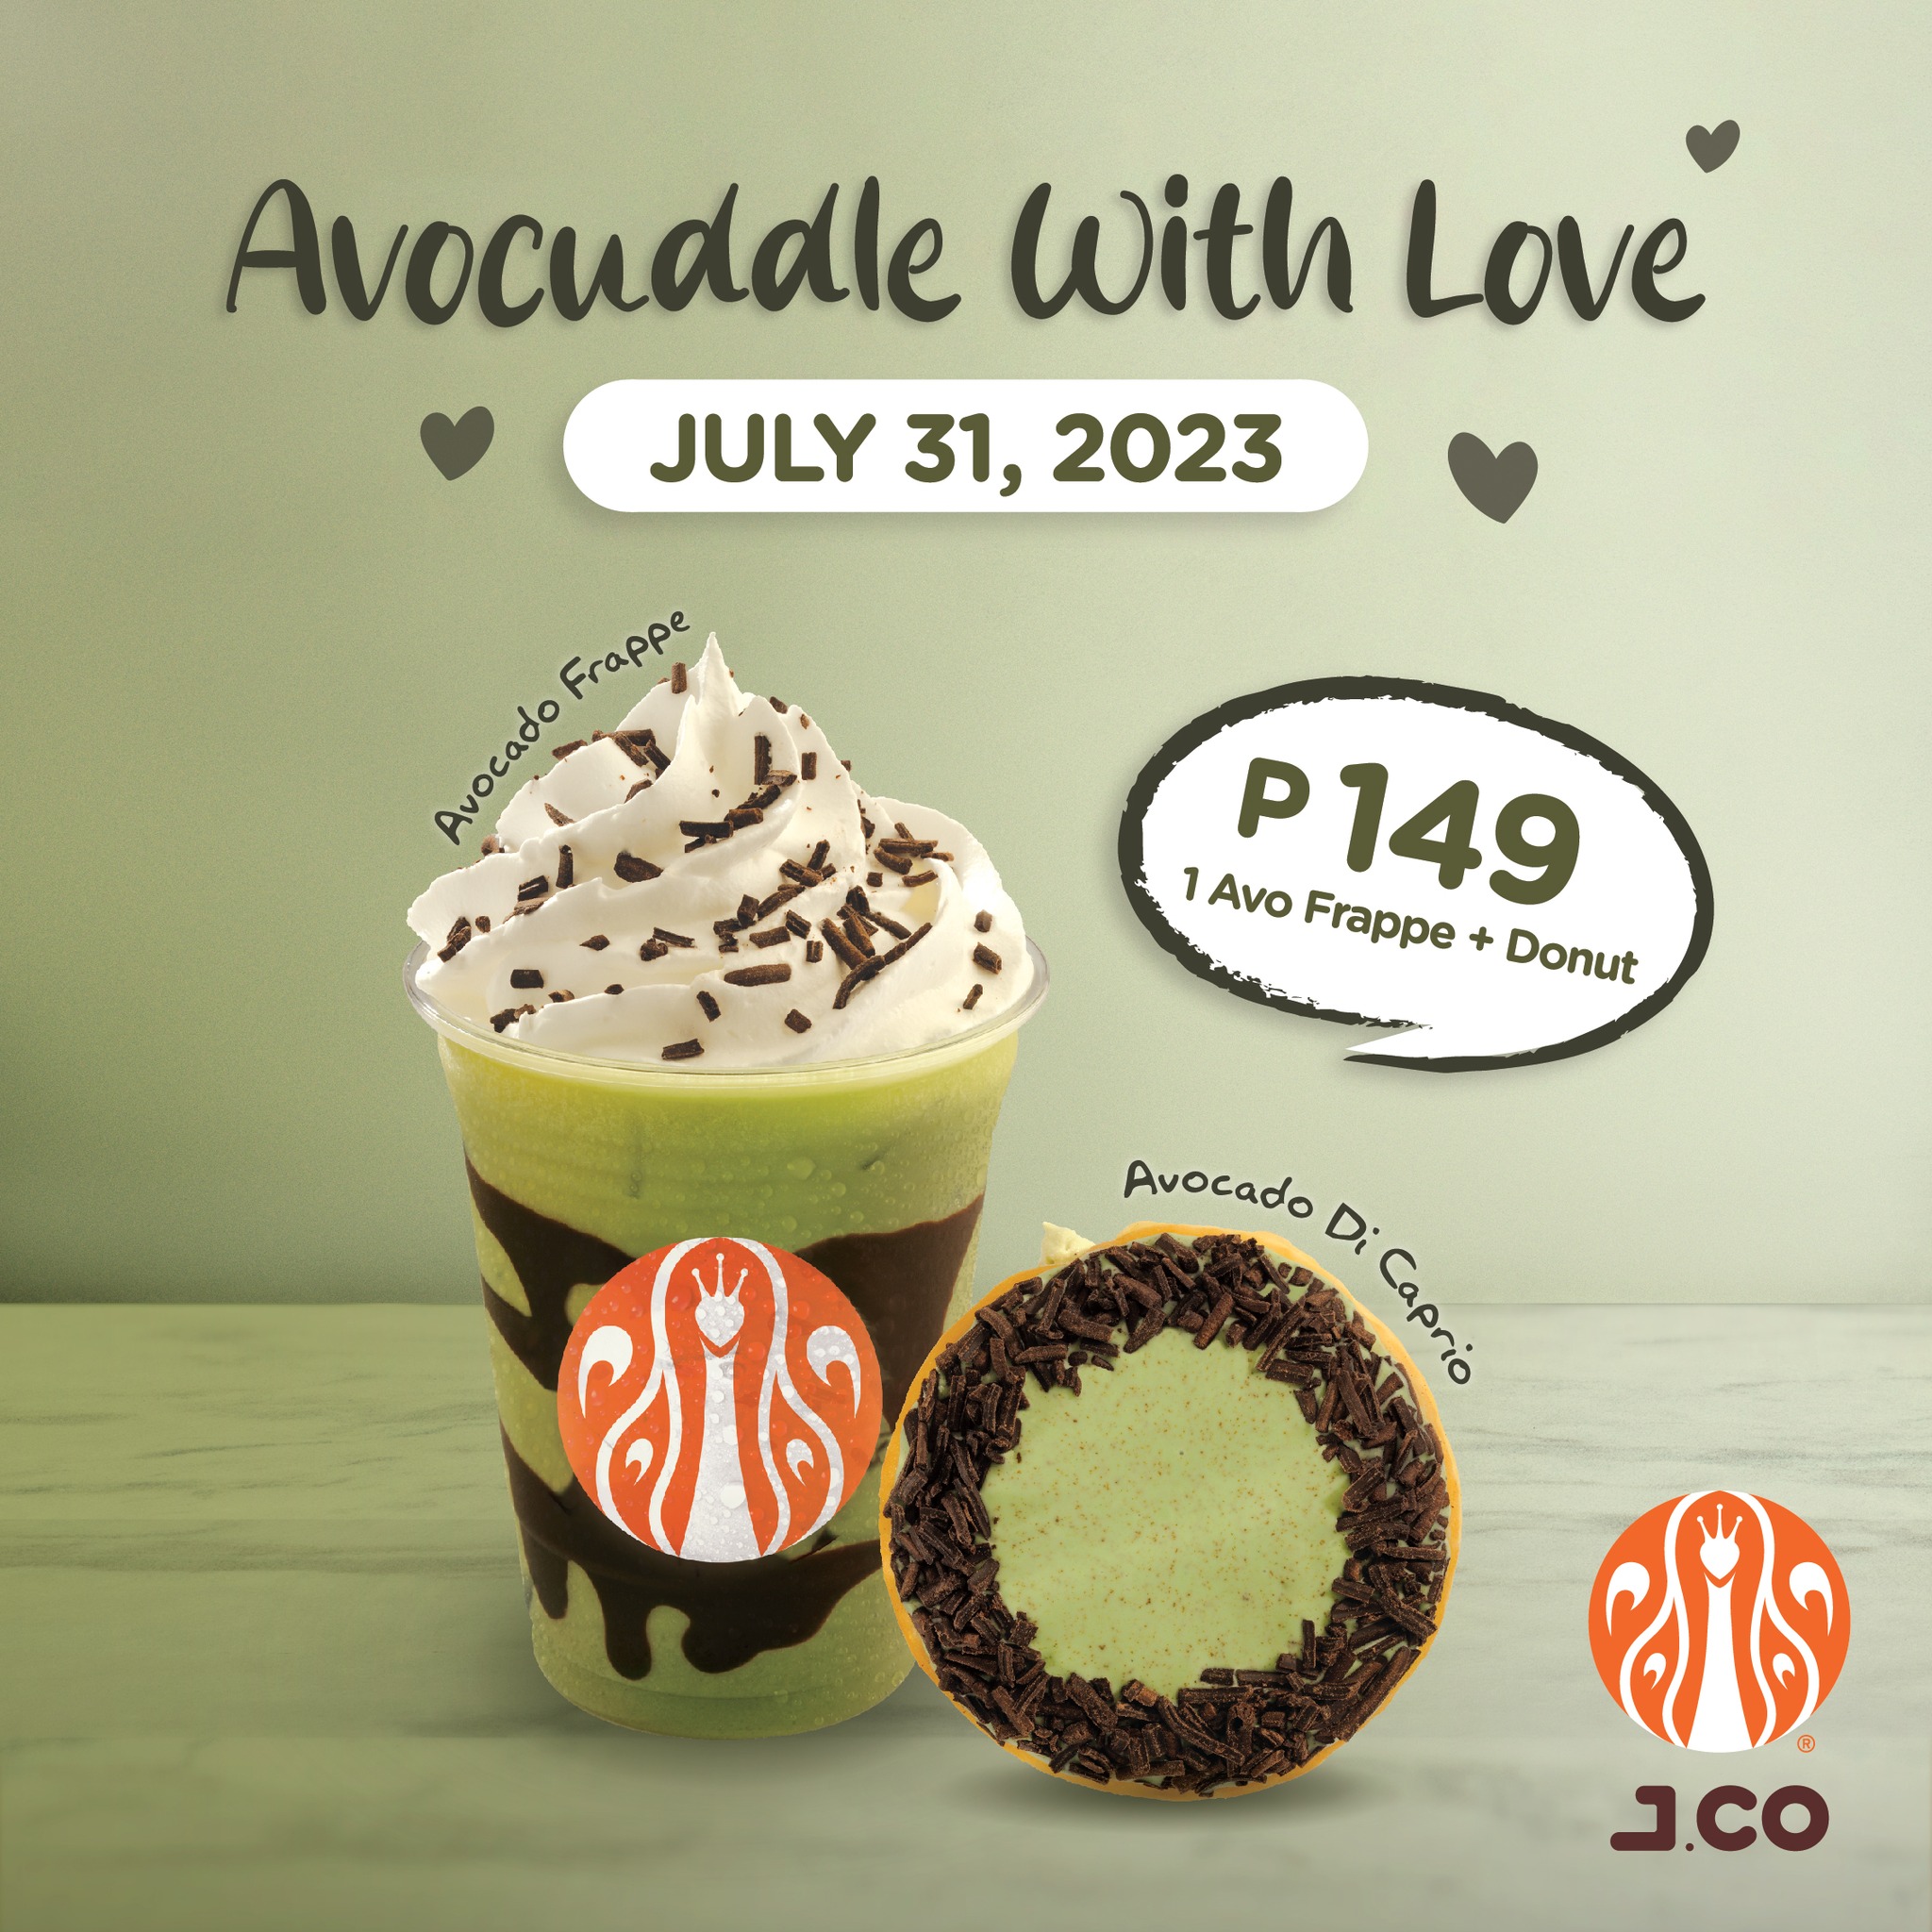 J.CO Donuts' AVOCuddle with Love Promo